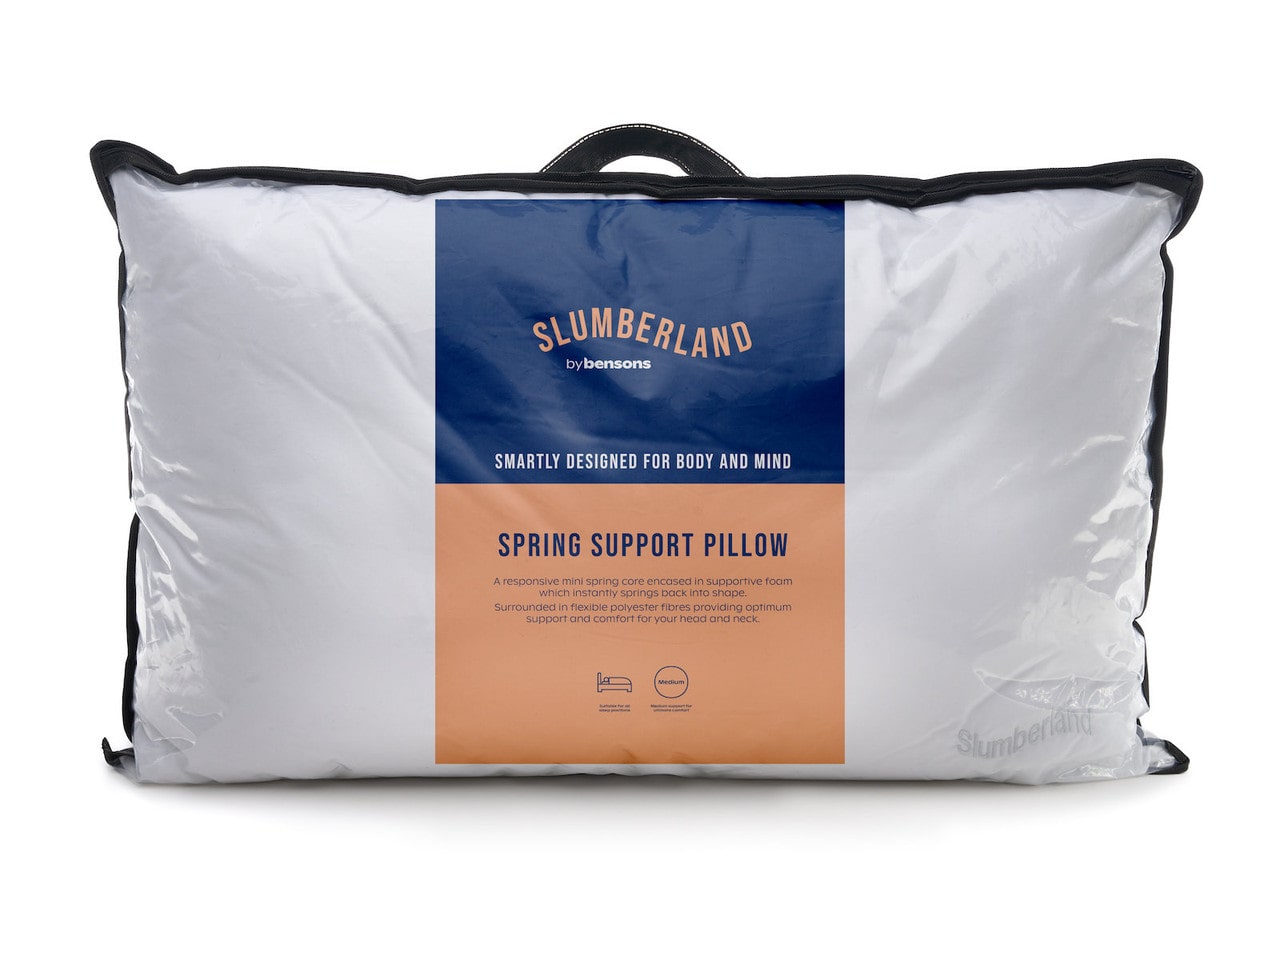 Slumberland by Bensons Spring Support Pillow